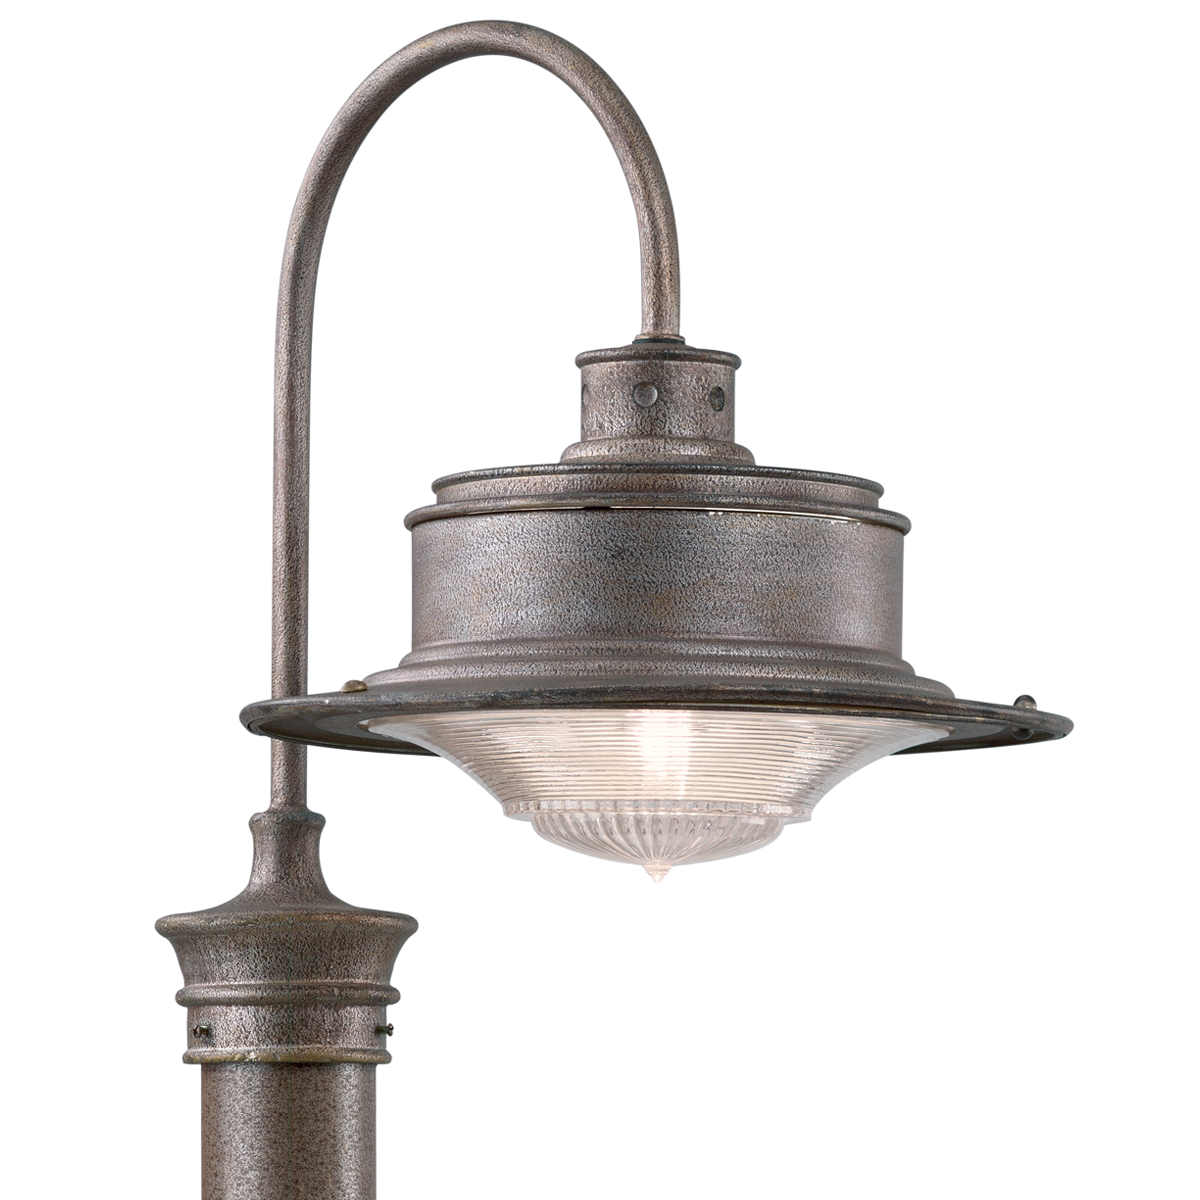 Troy Lighting SOUTH STREET 1LT POST DOWNLIGHT LARGE OLD GALVANIZED P9394 Outdoor l Post/Pier Mounts Troy Lighting OLD GALVANIZED  